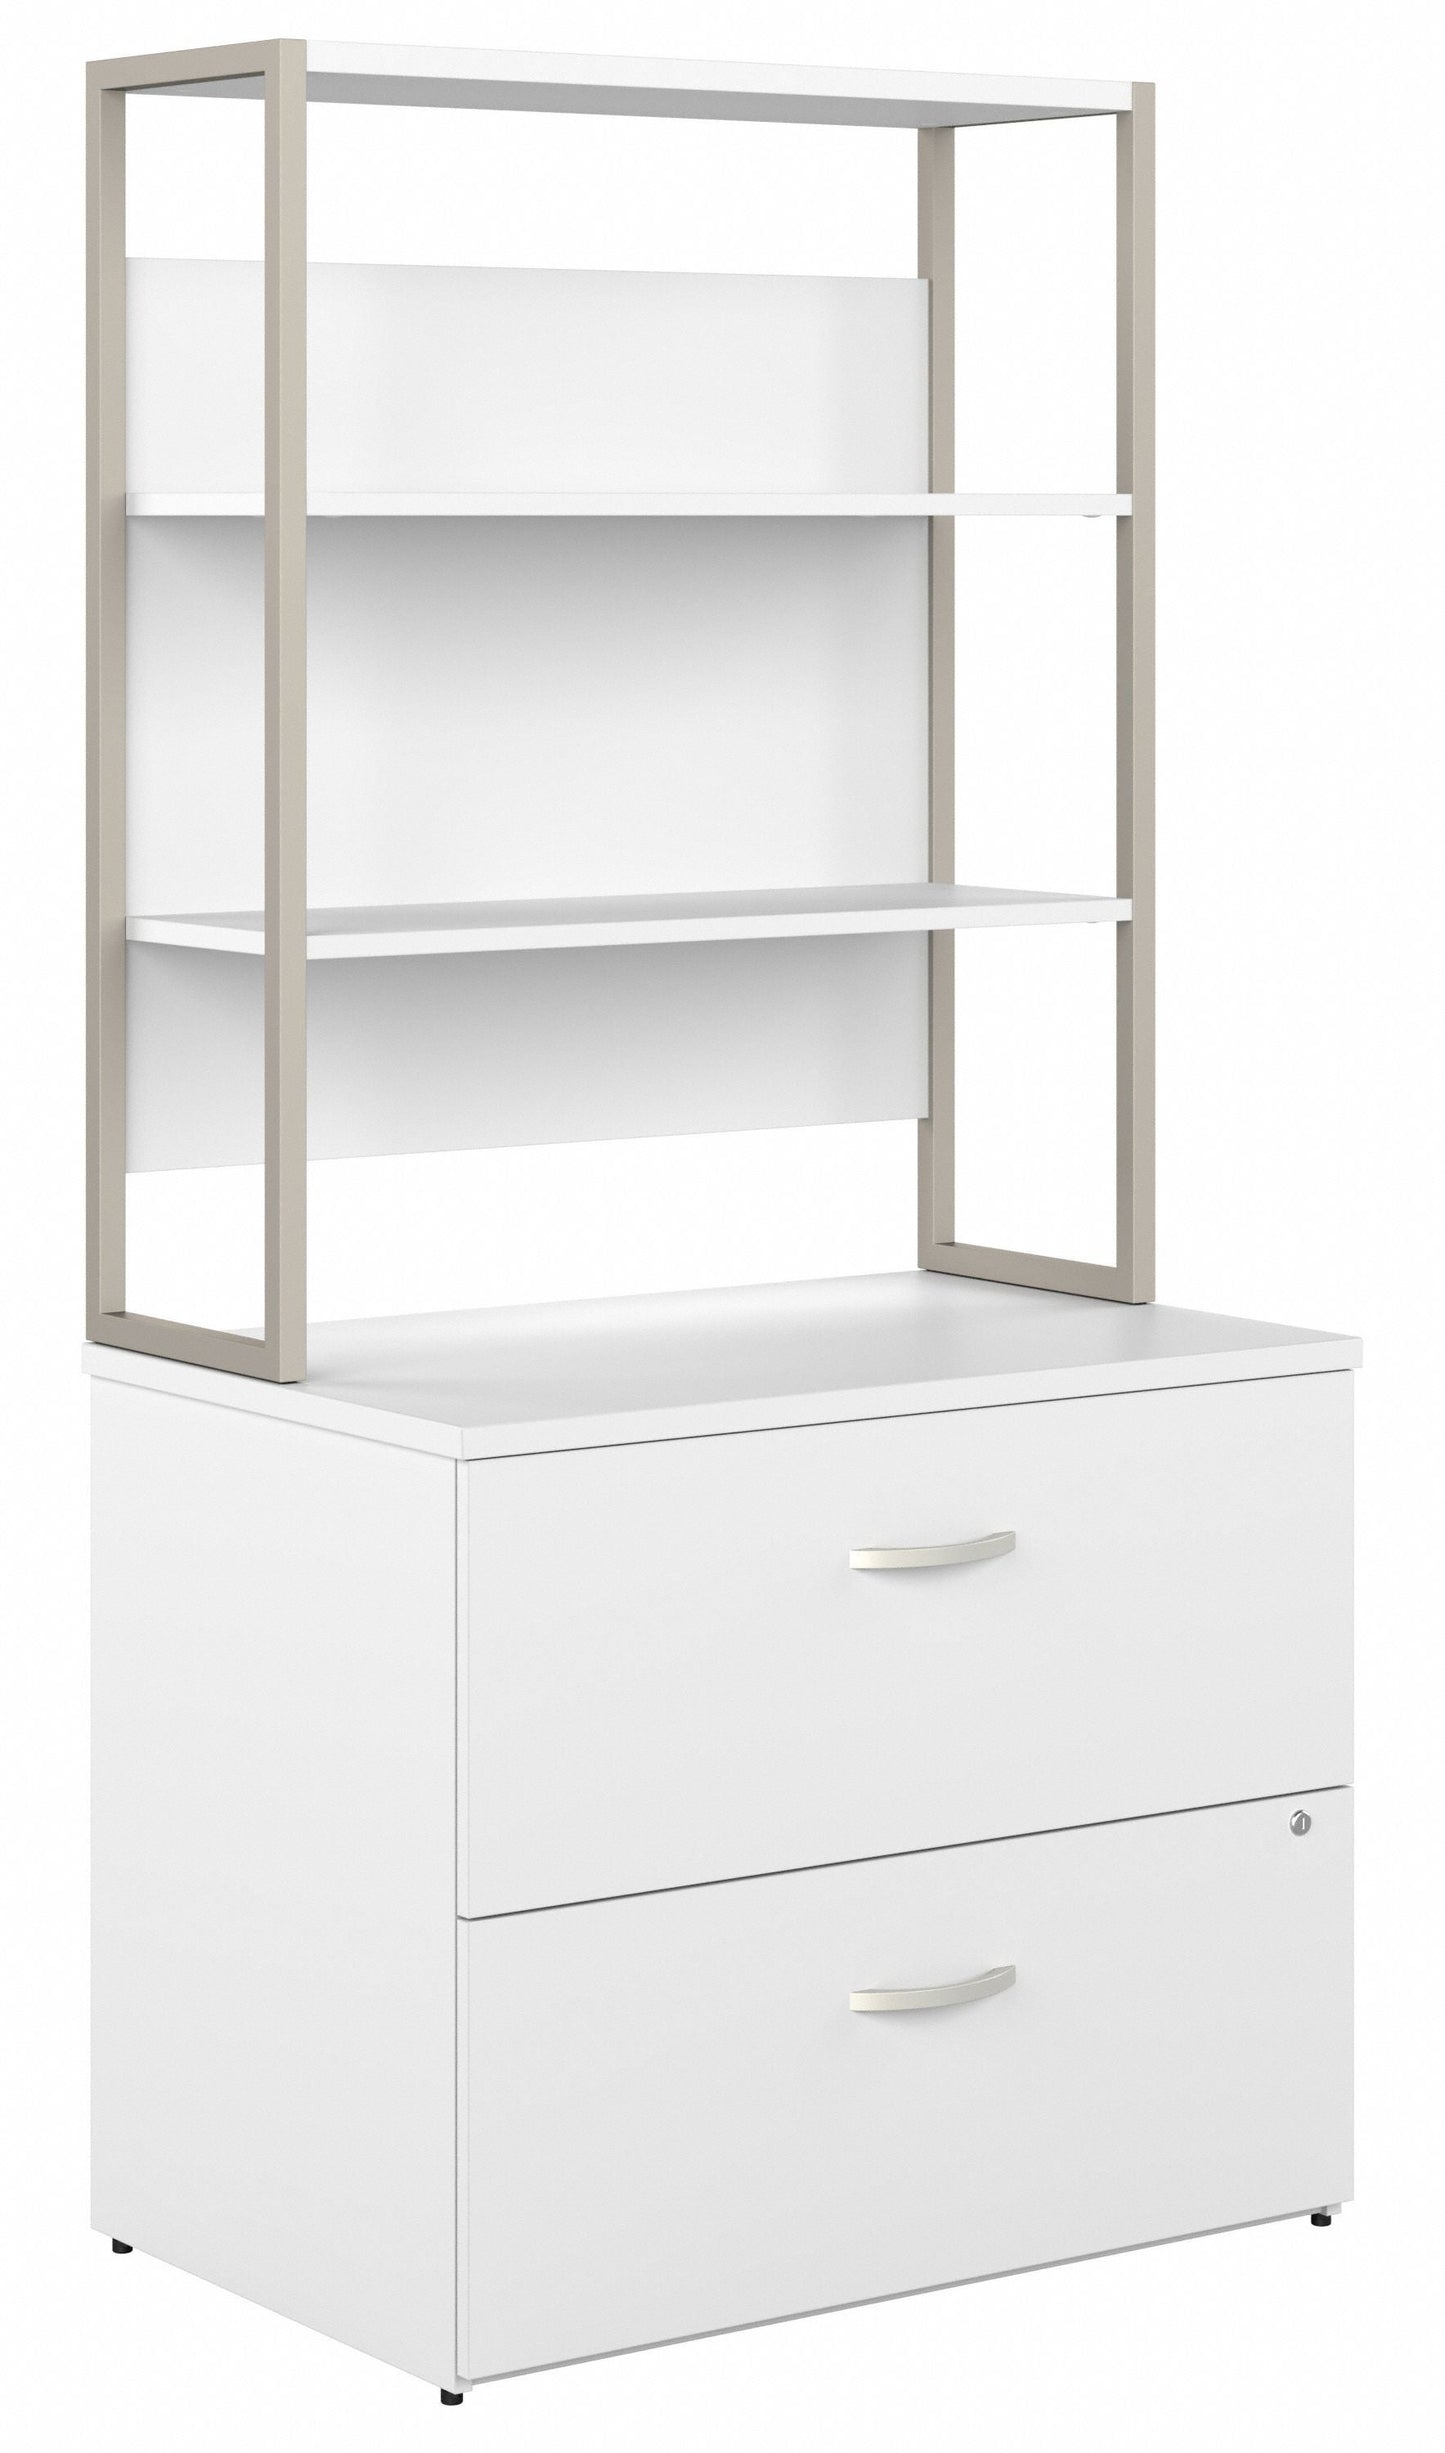 Bush Business Furniture Hybrid 2 Drawer Lateral File Cabinet with Shelves in White